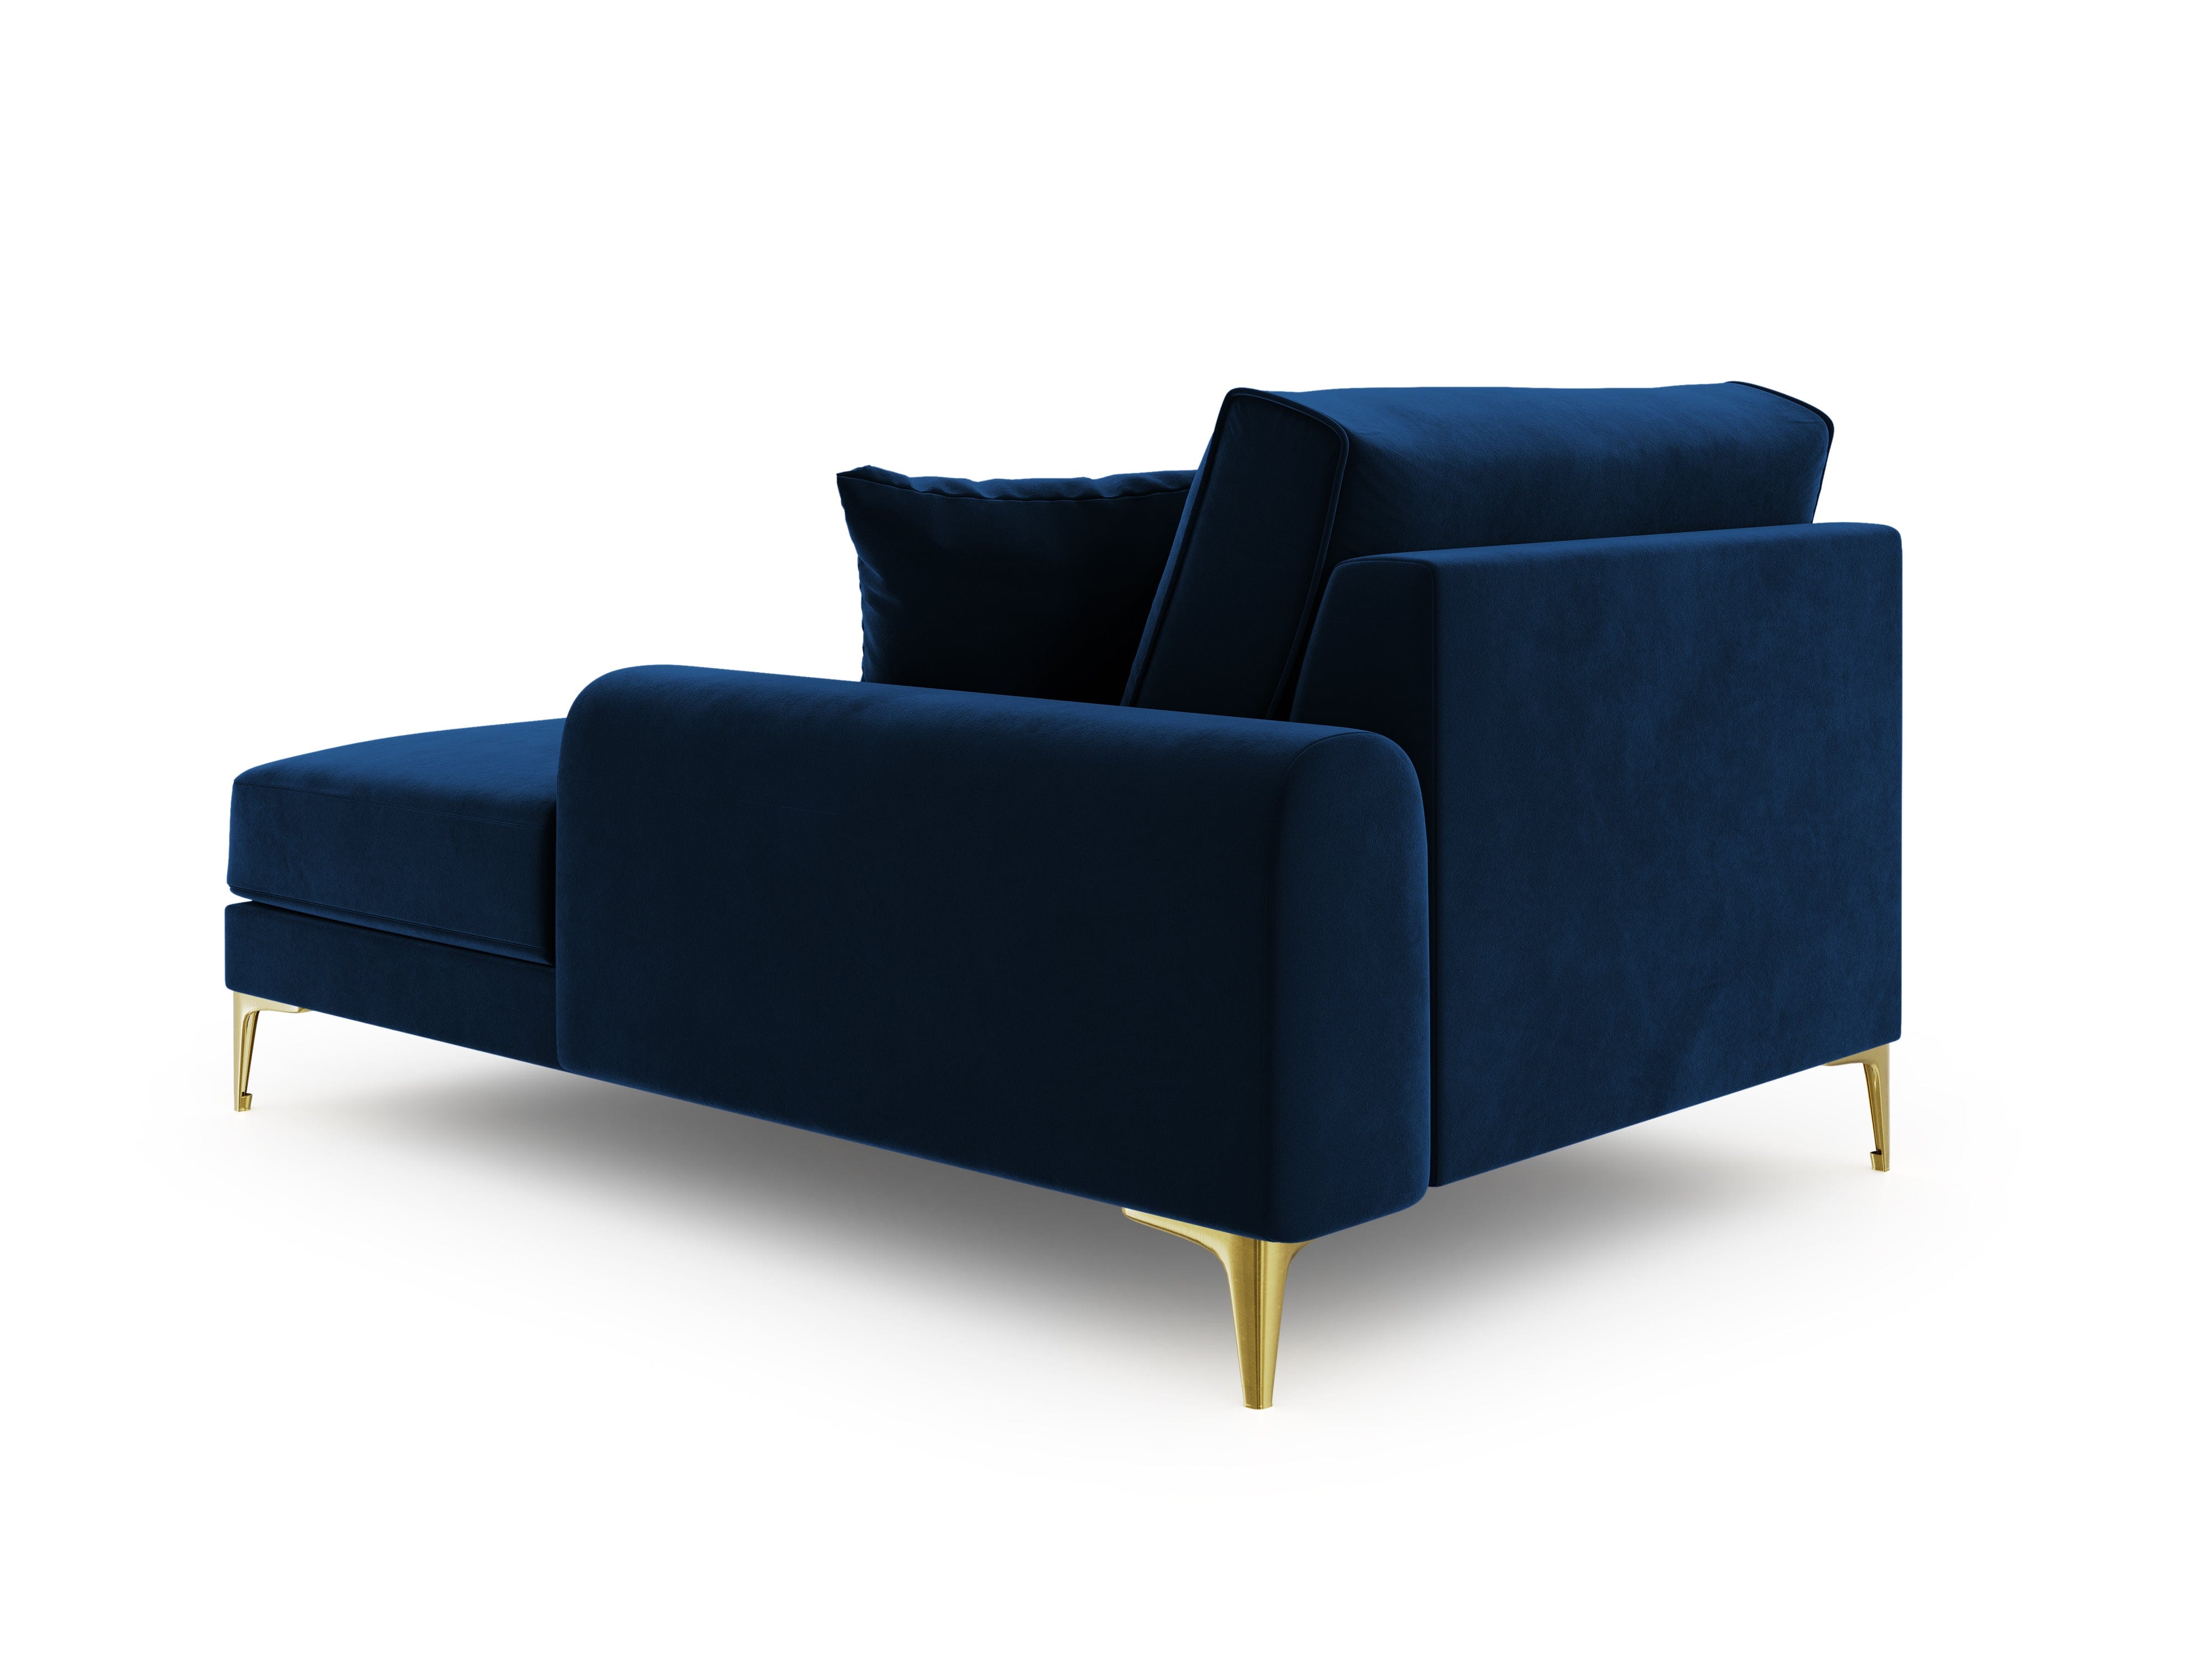 Velvet Chaise Longue Right, "Larnite", 1 Seat, 102x182x90
Made in Europe, Micadoni, Eye on Design